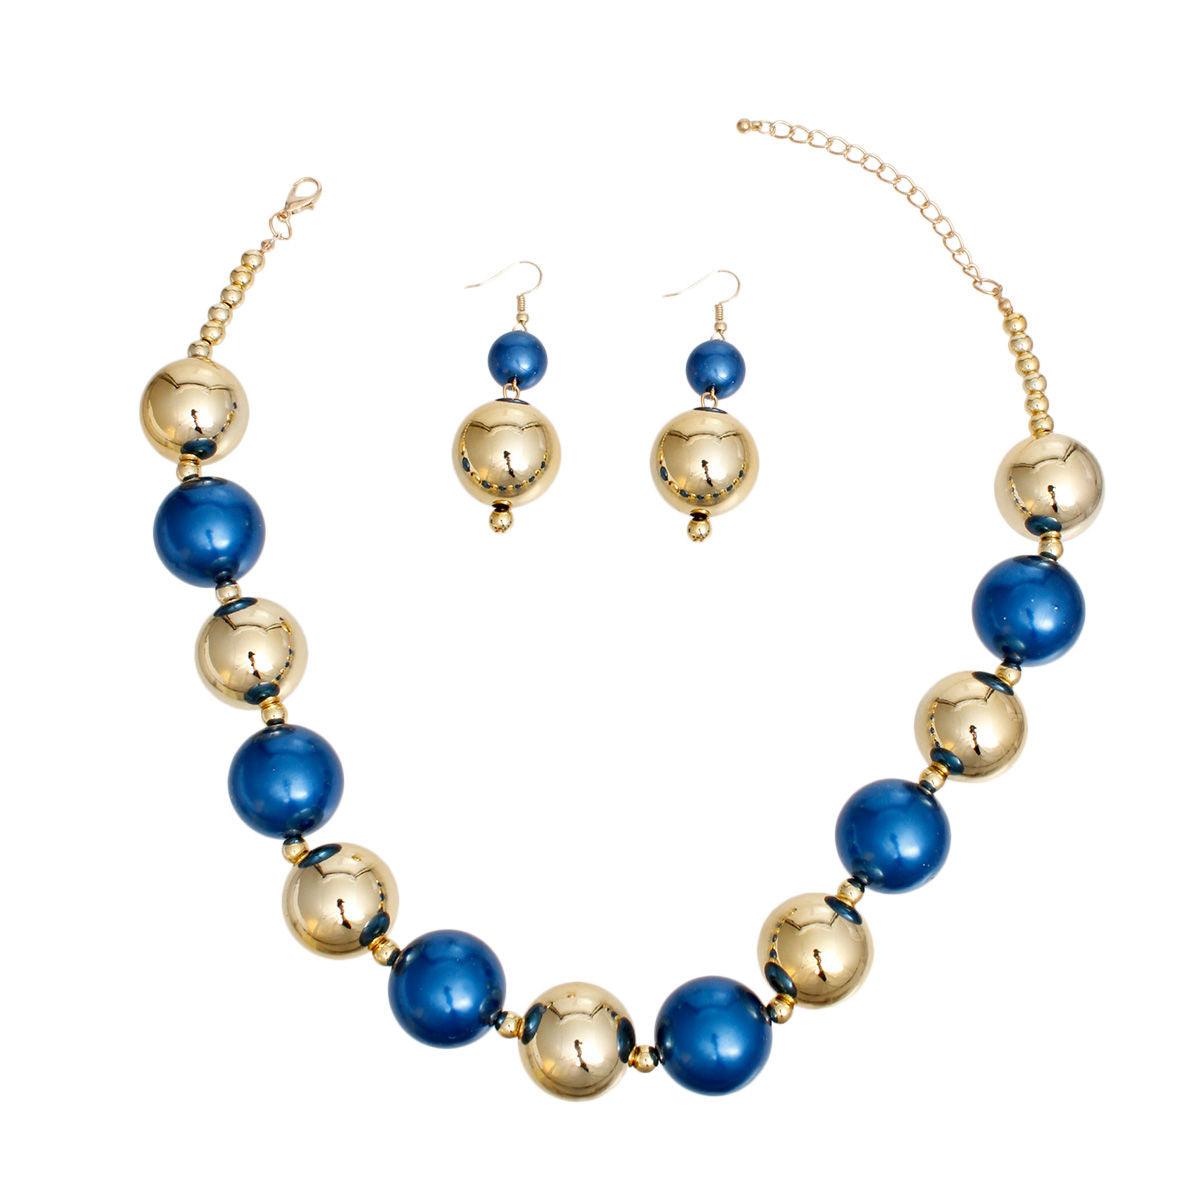 Bauble Pearl Blue Gold Necklace Earrings Set - Level Up Your Fashion Jewelry Collection